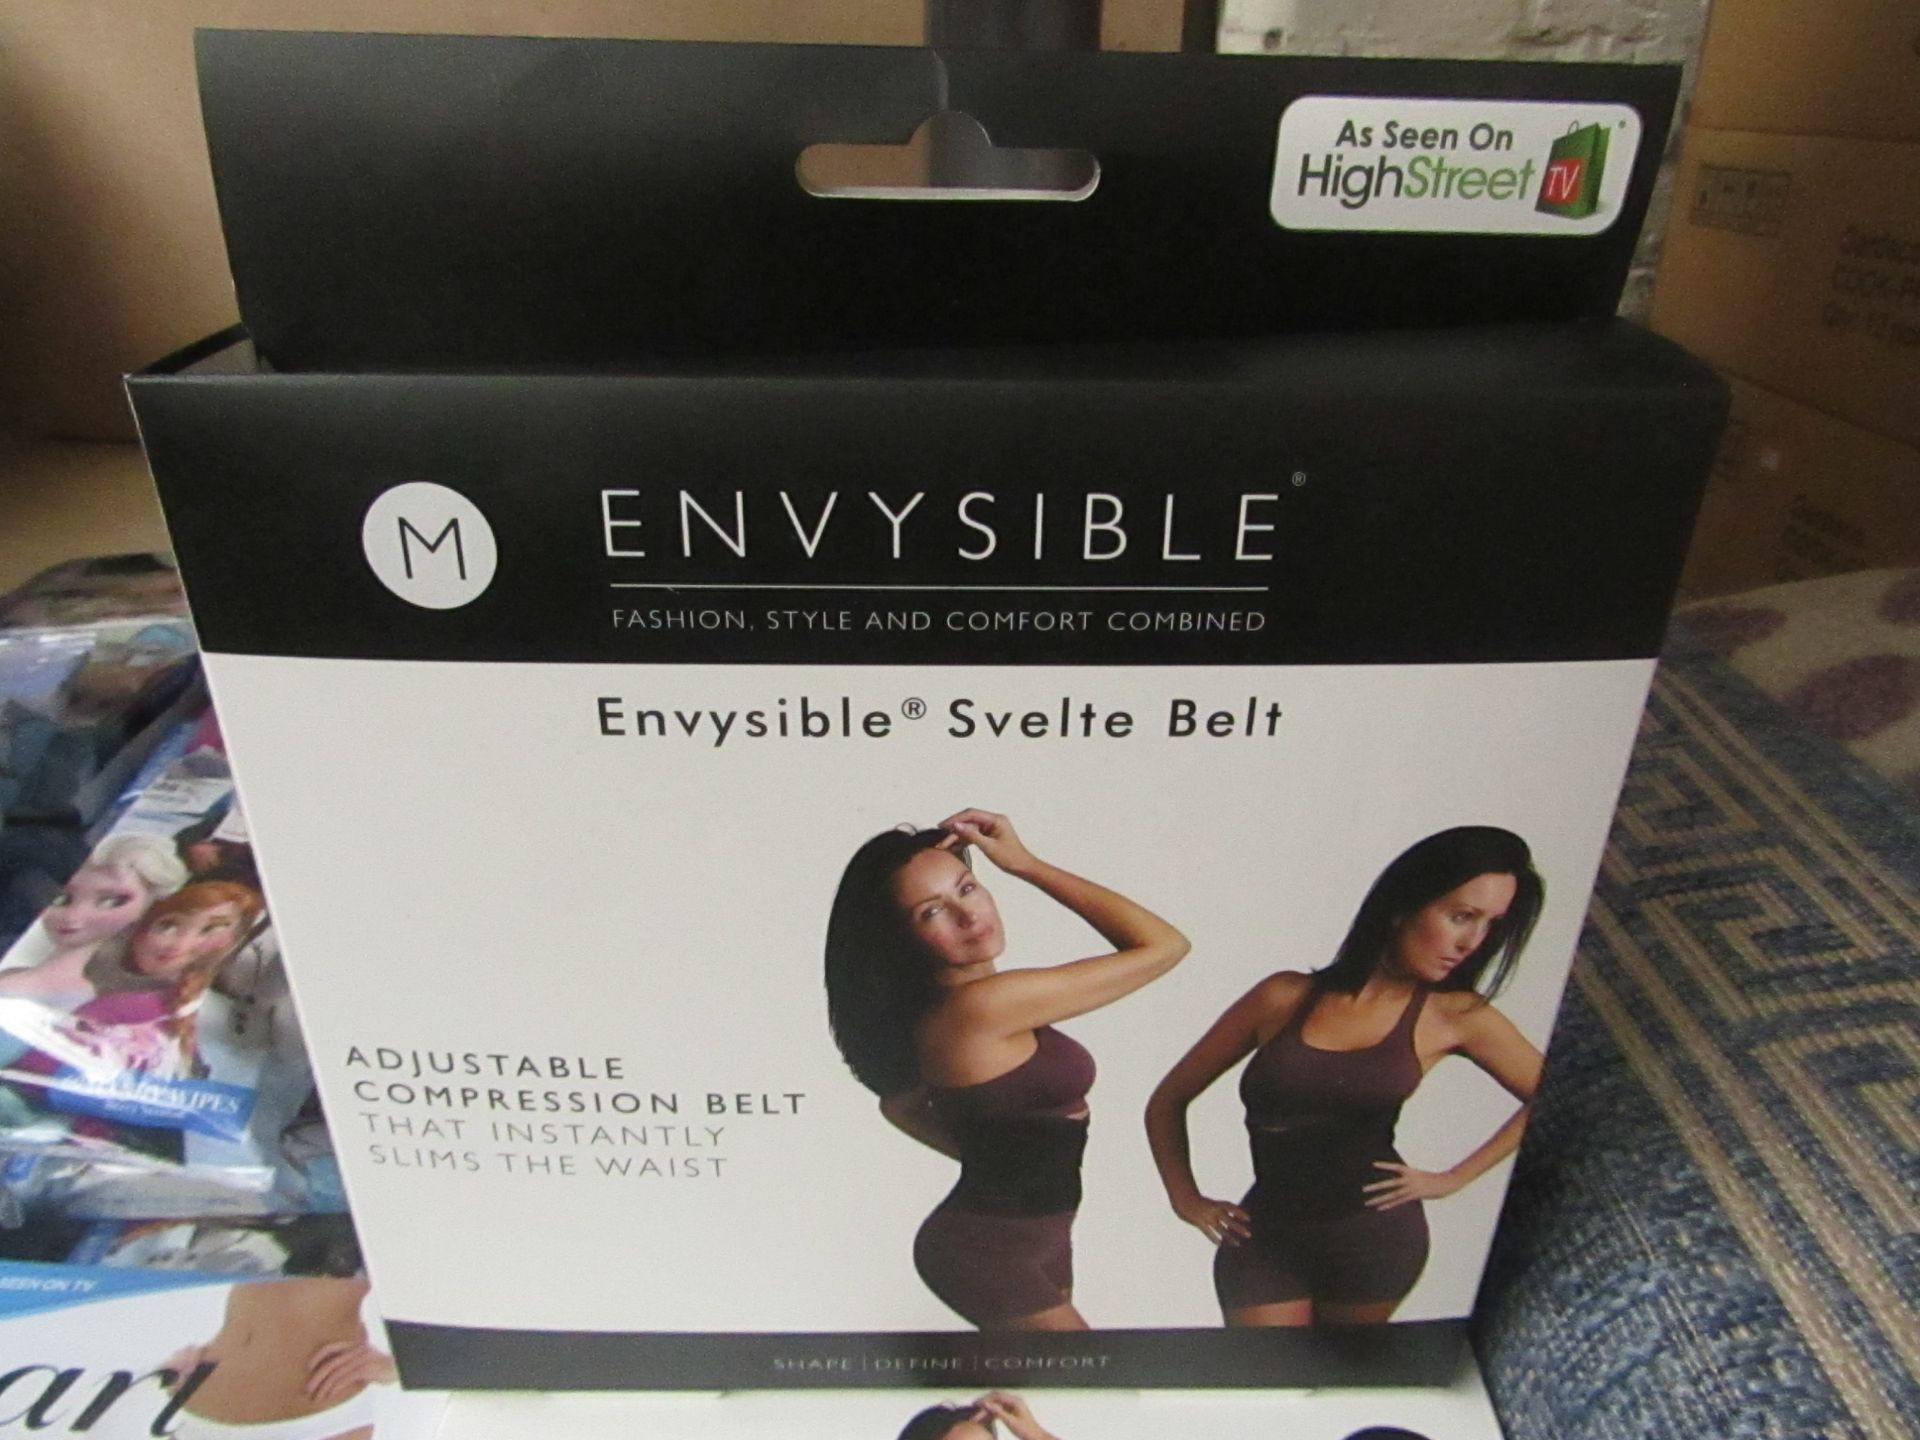 Envysible Ajustable Compression Belt that instantly slims waist size M new & boxed